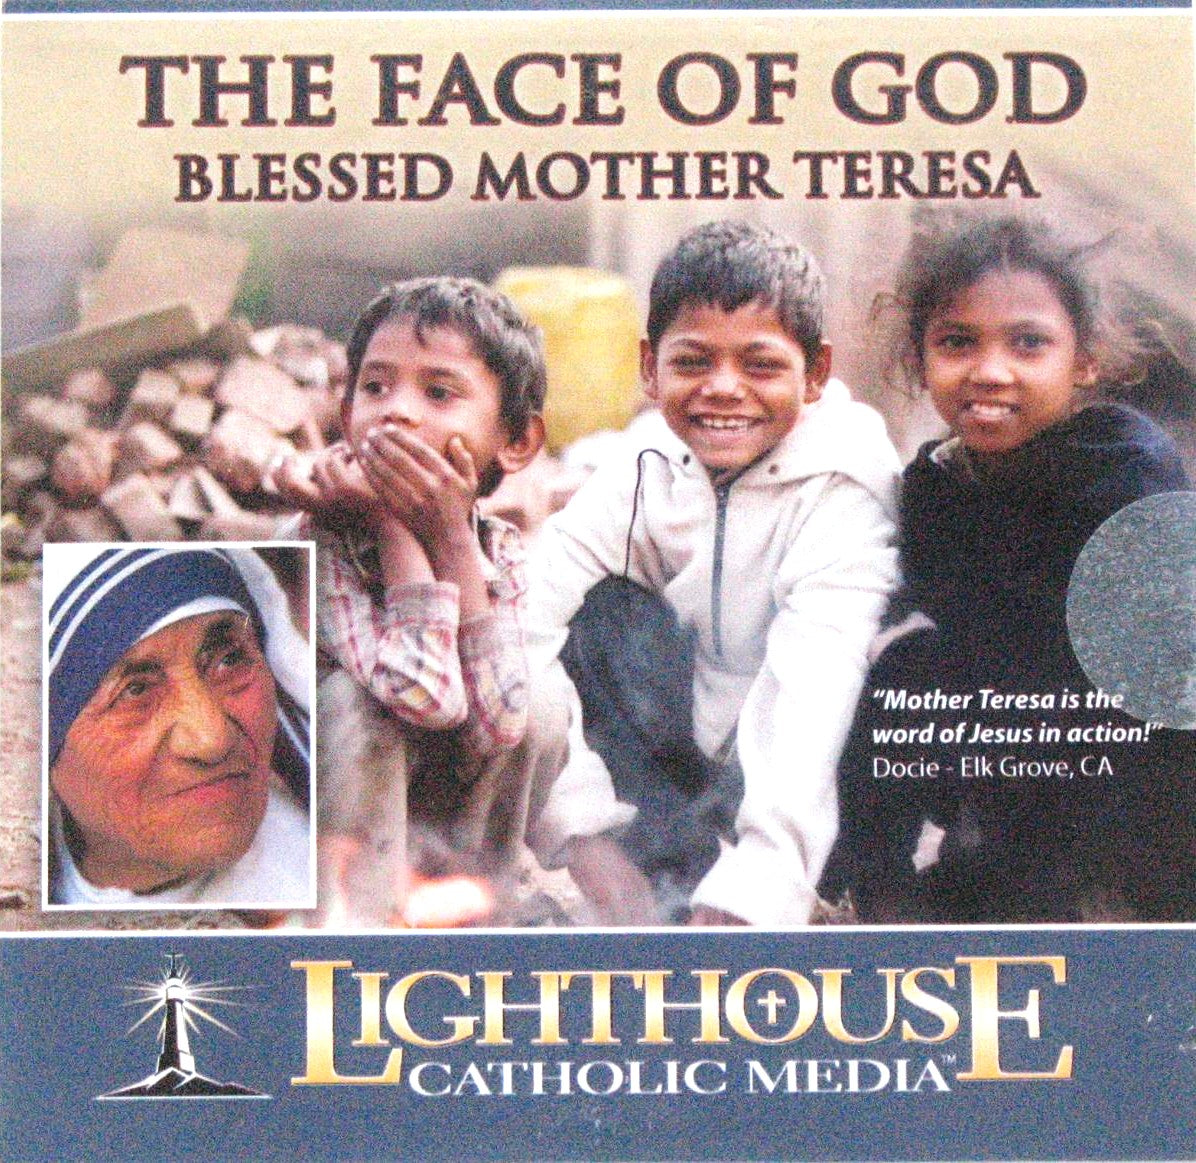 The Face of God - CD Talk by Blessed Mother Teresa of Calcutta